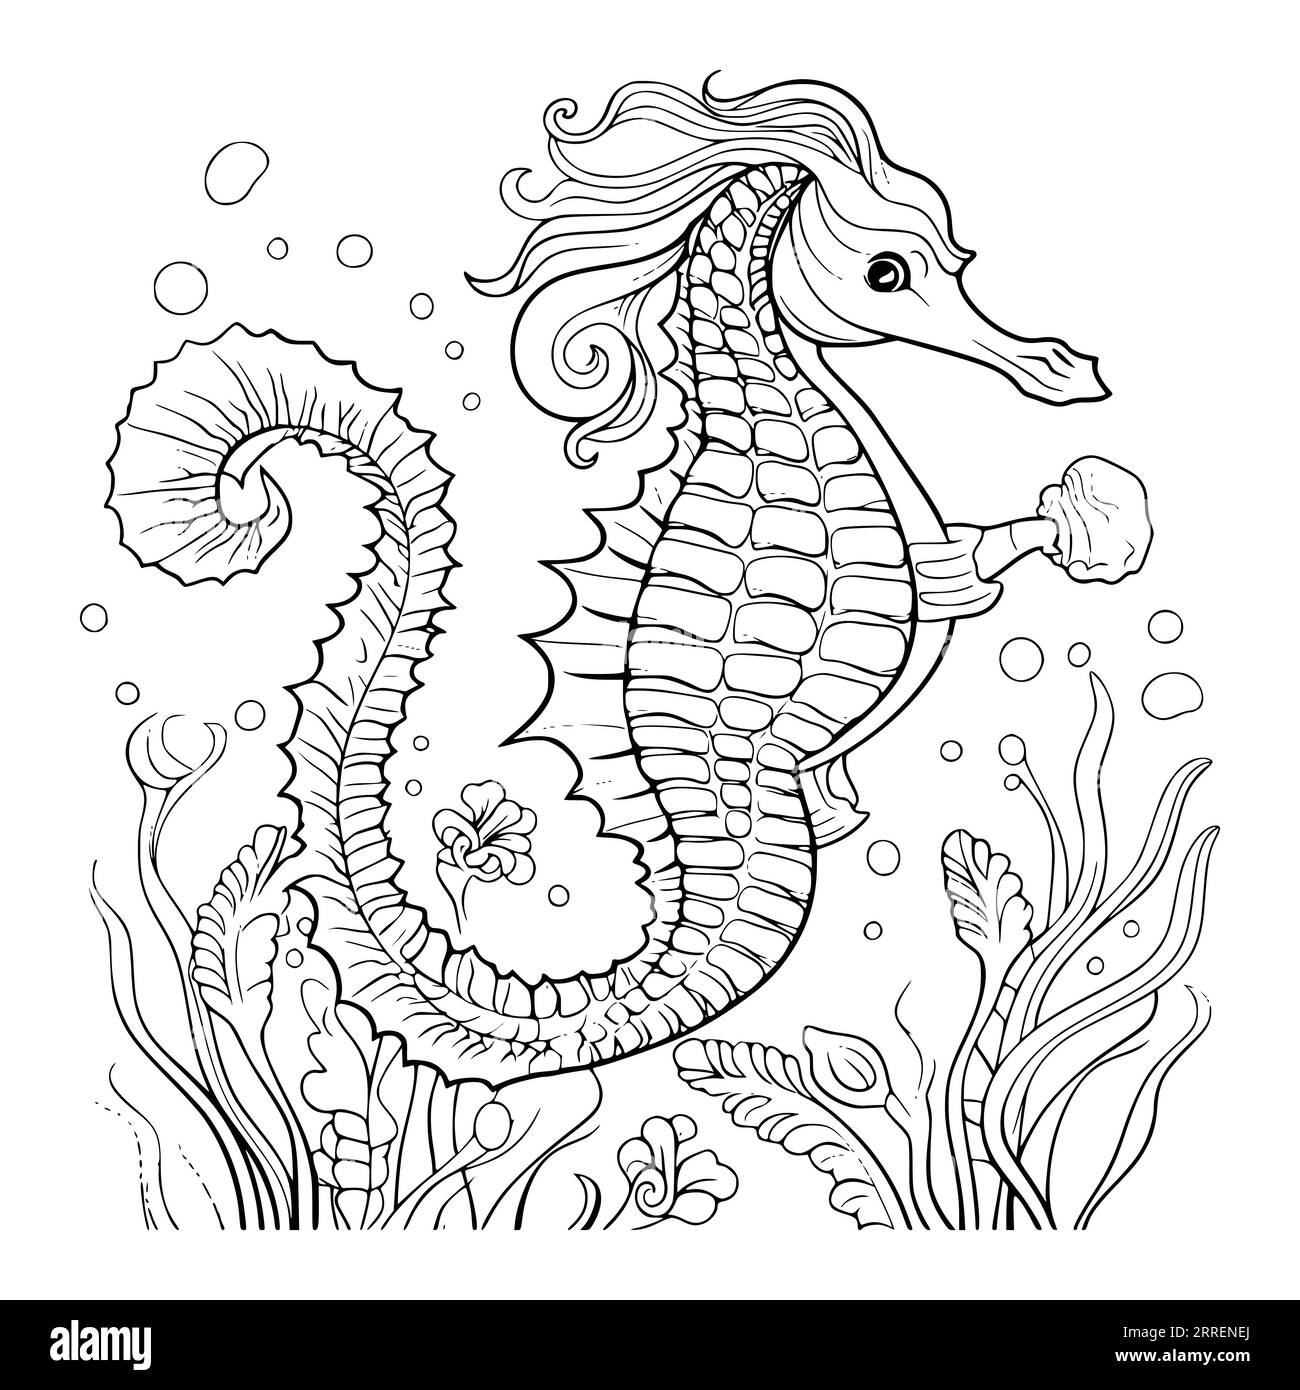 Beautiful Seahorse Coloring Page For Kids Stock Vector